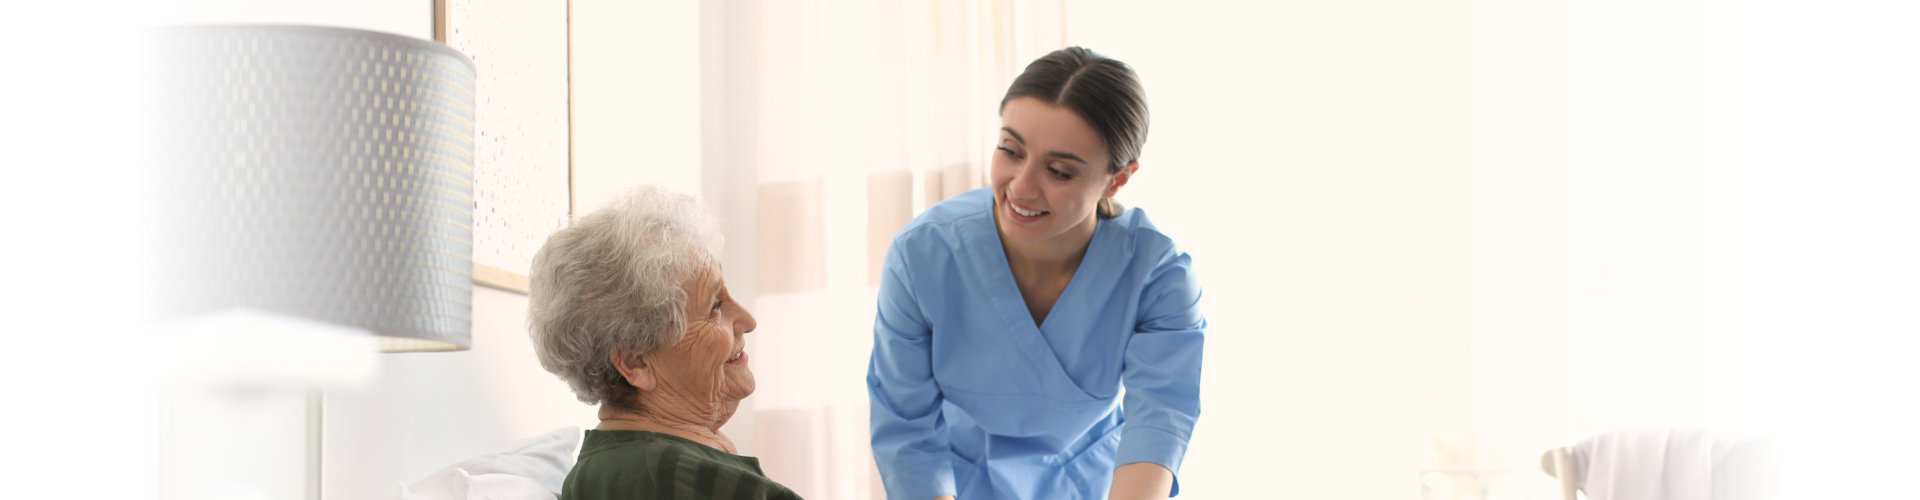 Care worker with elderly woman in geriatric hospice